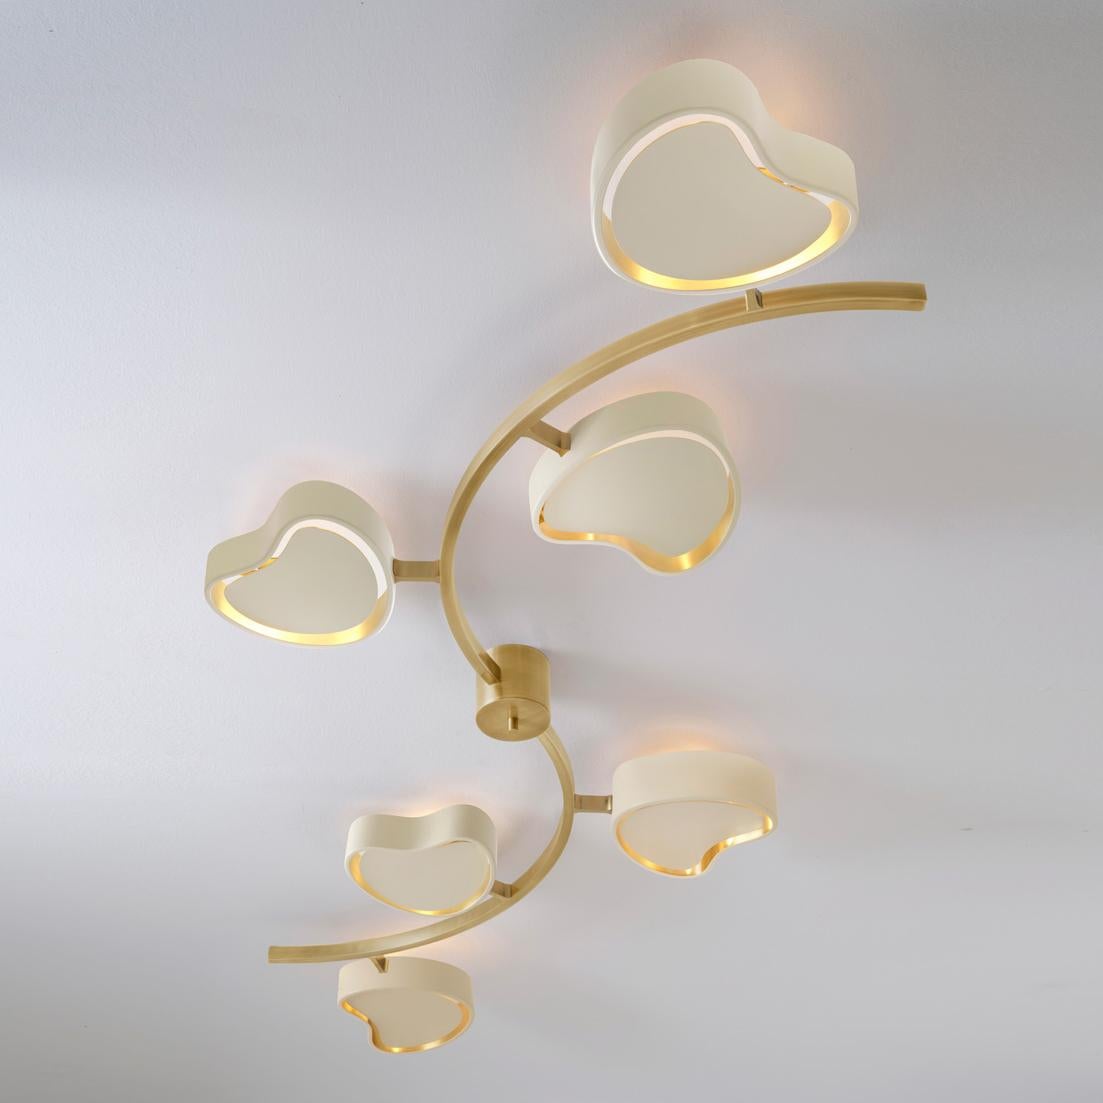 Italian Cuore N.6 Ceiling Light by Gaspare Asaro. Polished Brass Finish For Sale